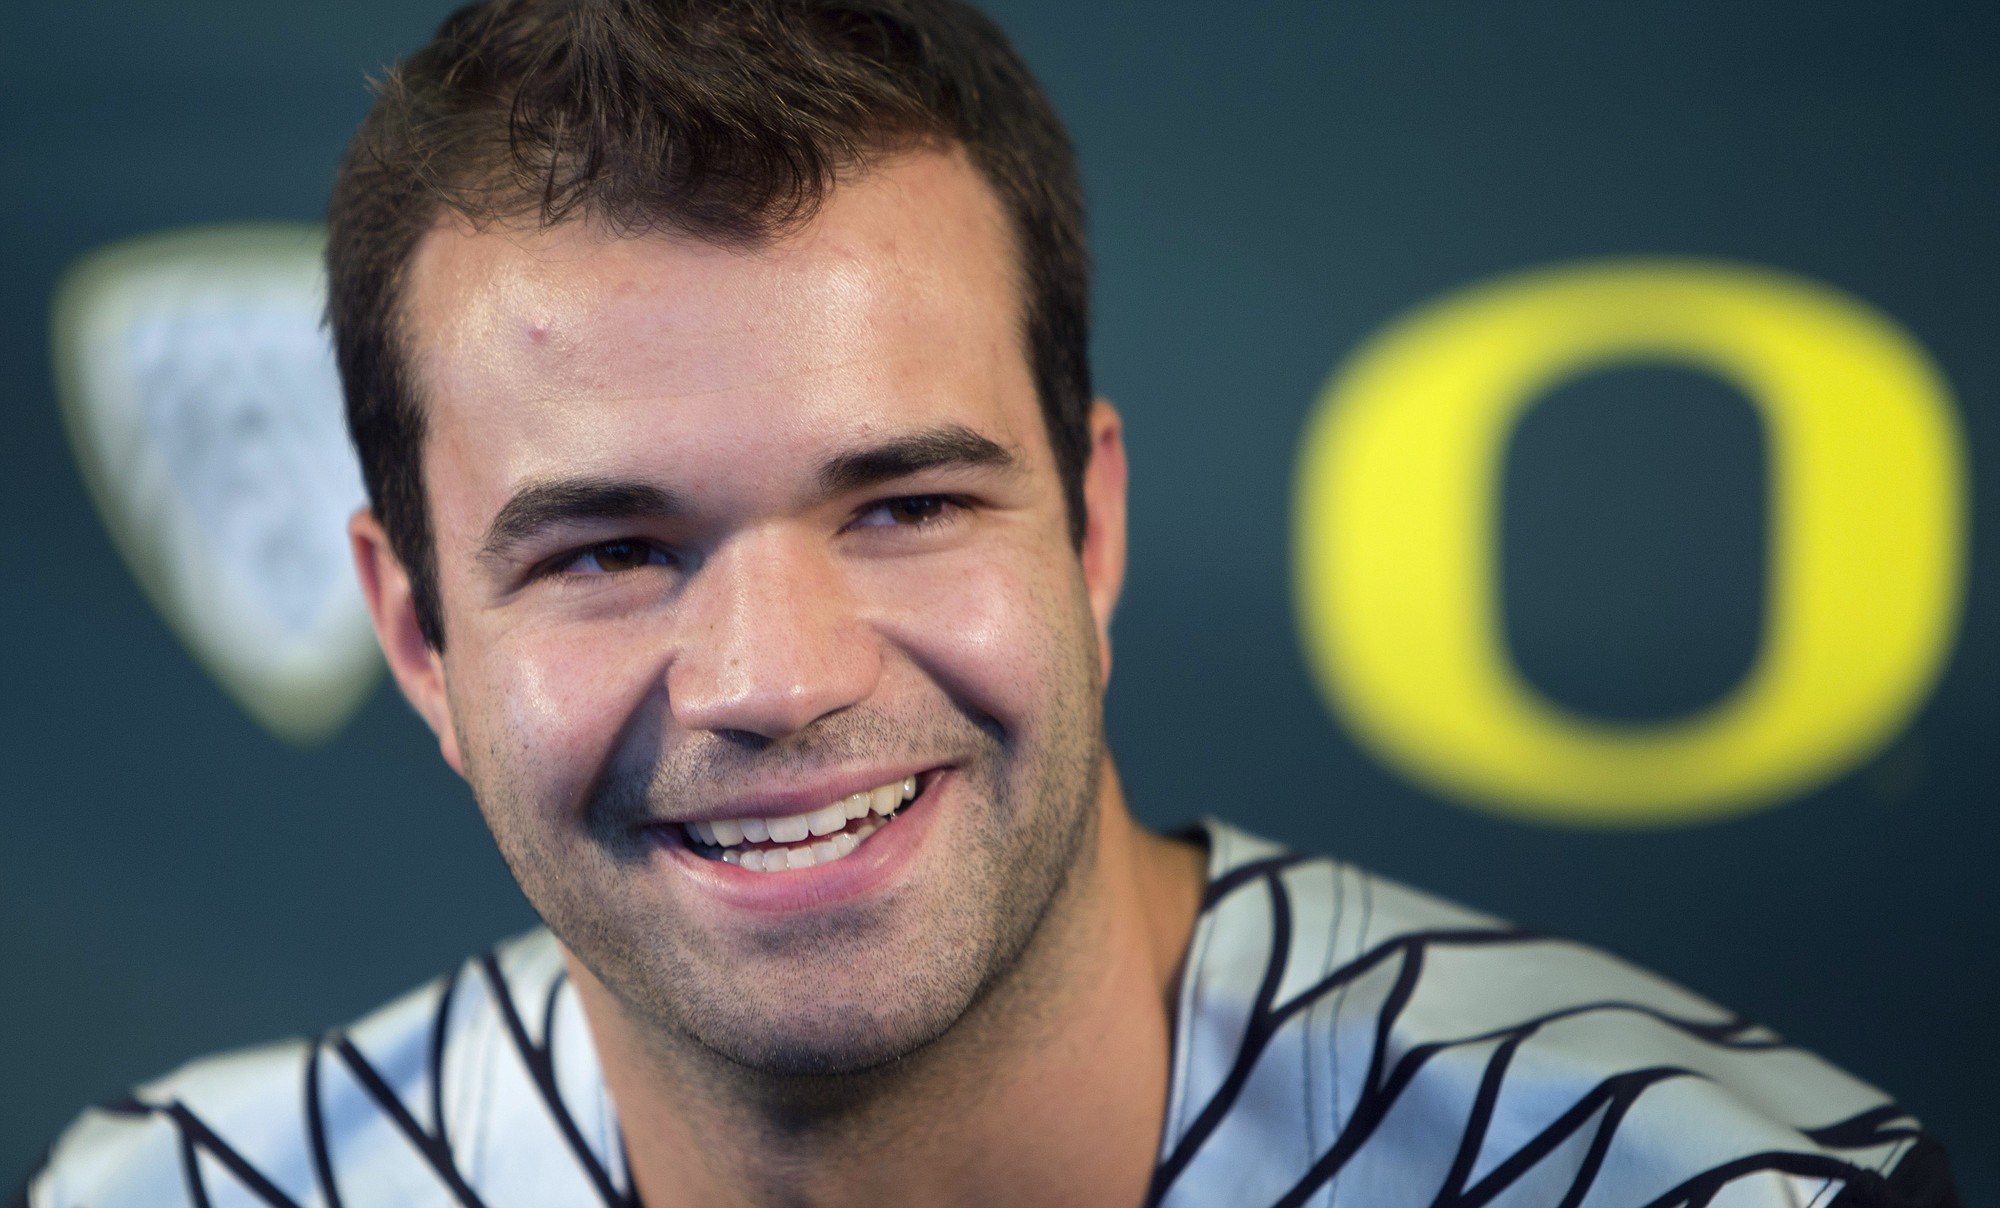 Oregon quarterback Jeff Lockie answers questions from the press during Media Day at Autzen Stadium in Eugene., Ore., on Monday, Aug. 10, 2015. The Ducks started their fall camp on Monday.